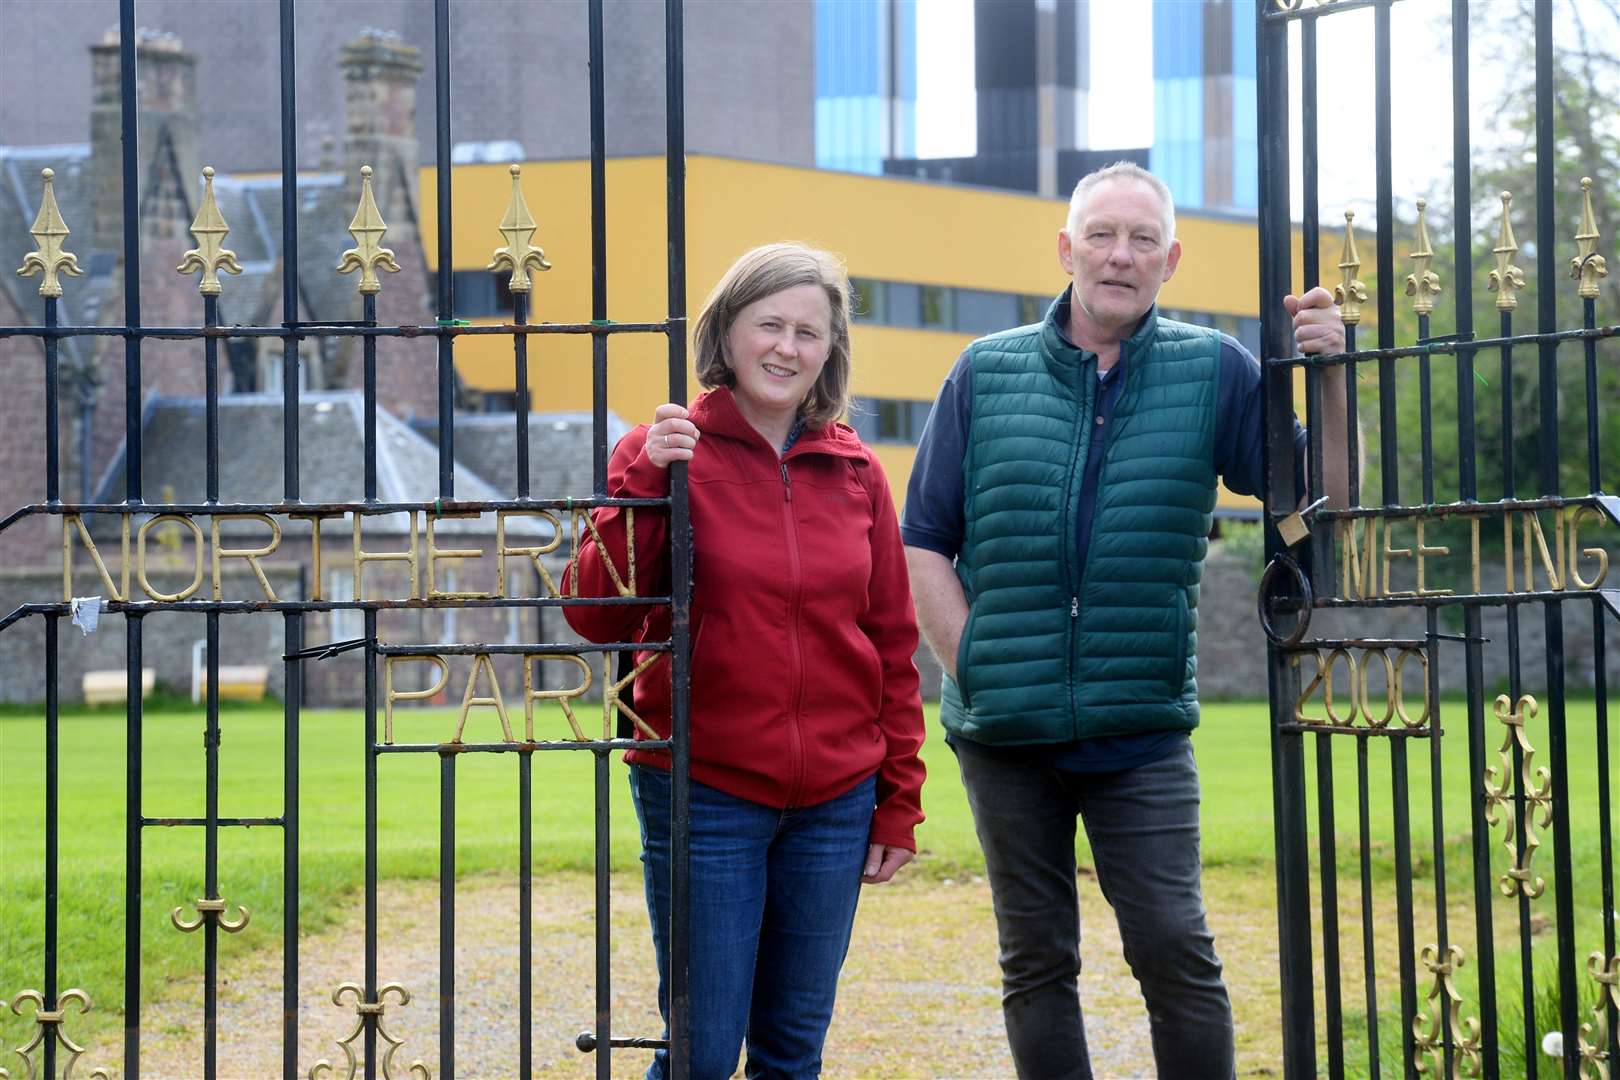 Alison Tanner, of the Inverness City Heritage Trust, and Jon Ford, of the Northern Meeting Park Group.